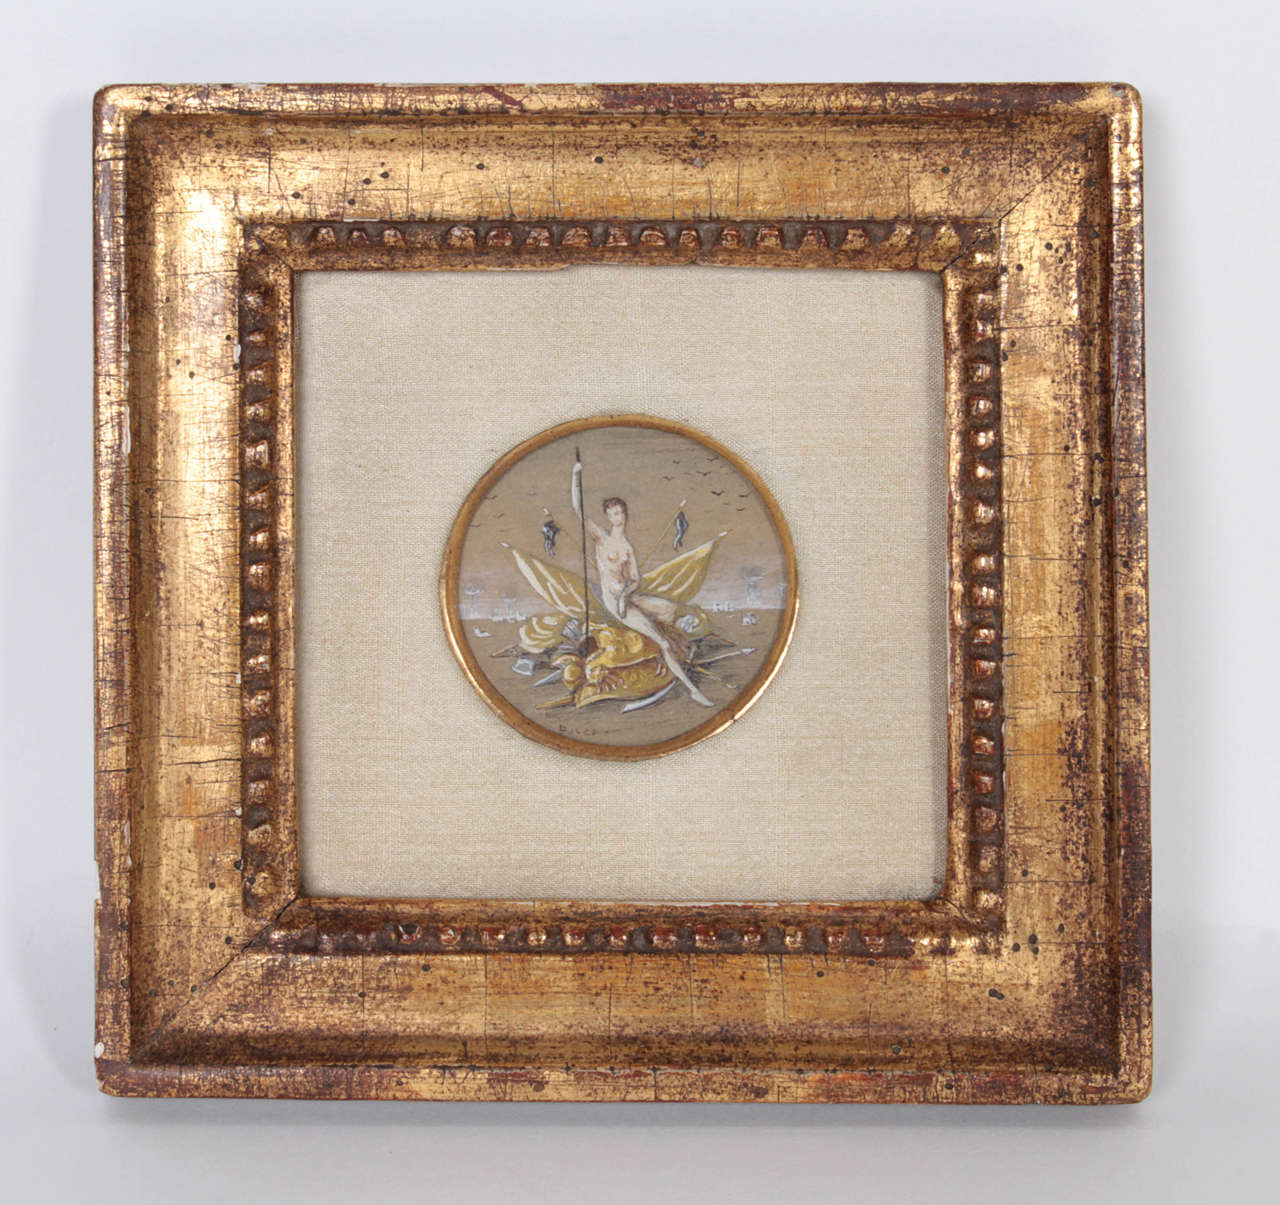 During the Cold War the jeweler Fulco, Duke of Verdura, painted this 2 inch diameter, tongue-in-cheek 